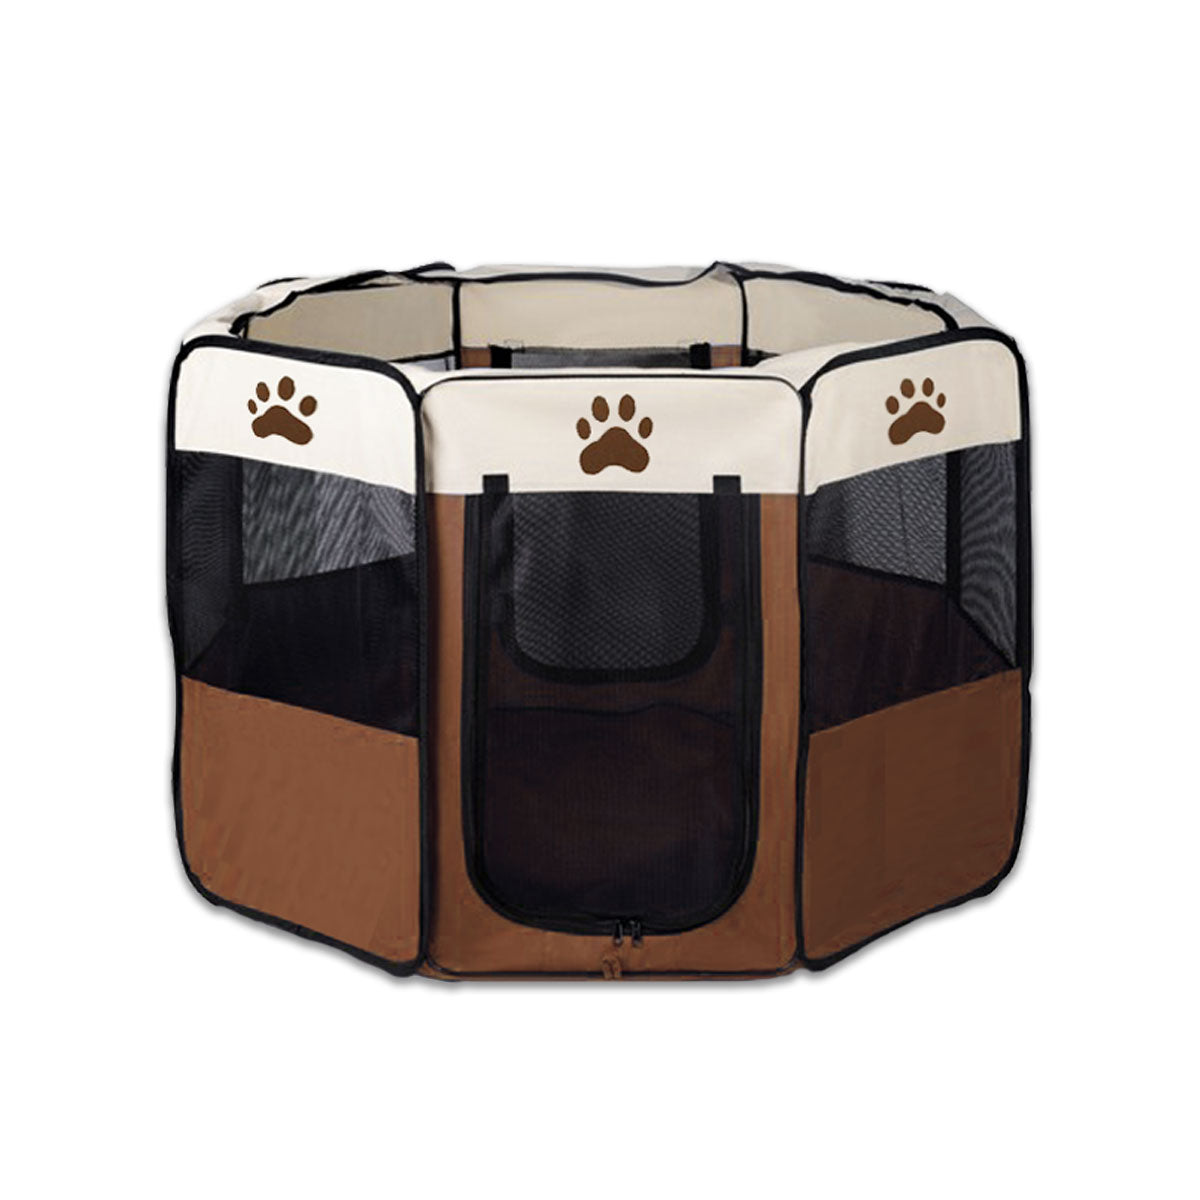 8 Panel Pet Dog Cat Crate Play Pen Bags Kennel Portable Tent Playpen Puppy Cage Large Brown